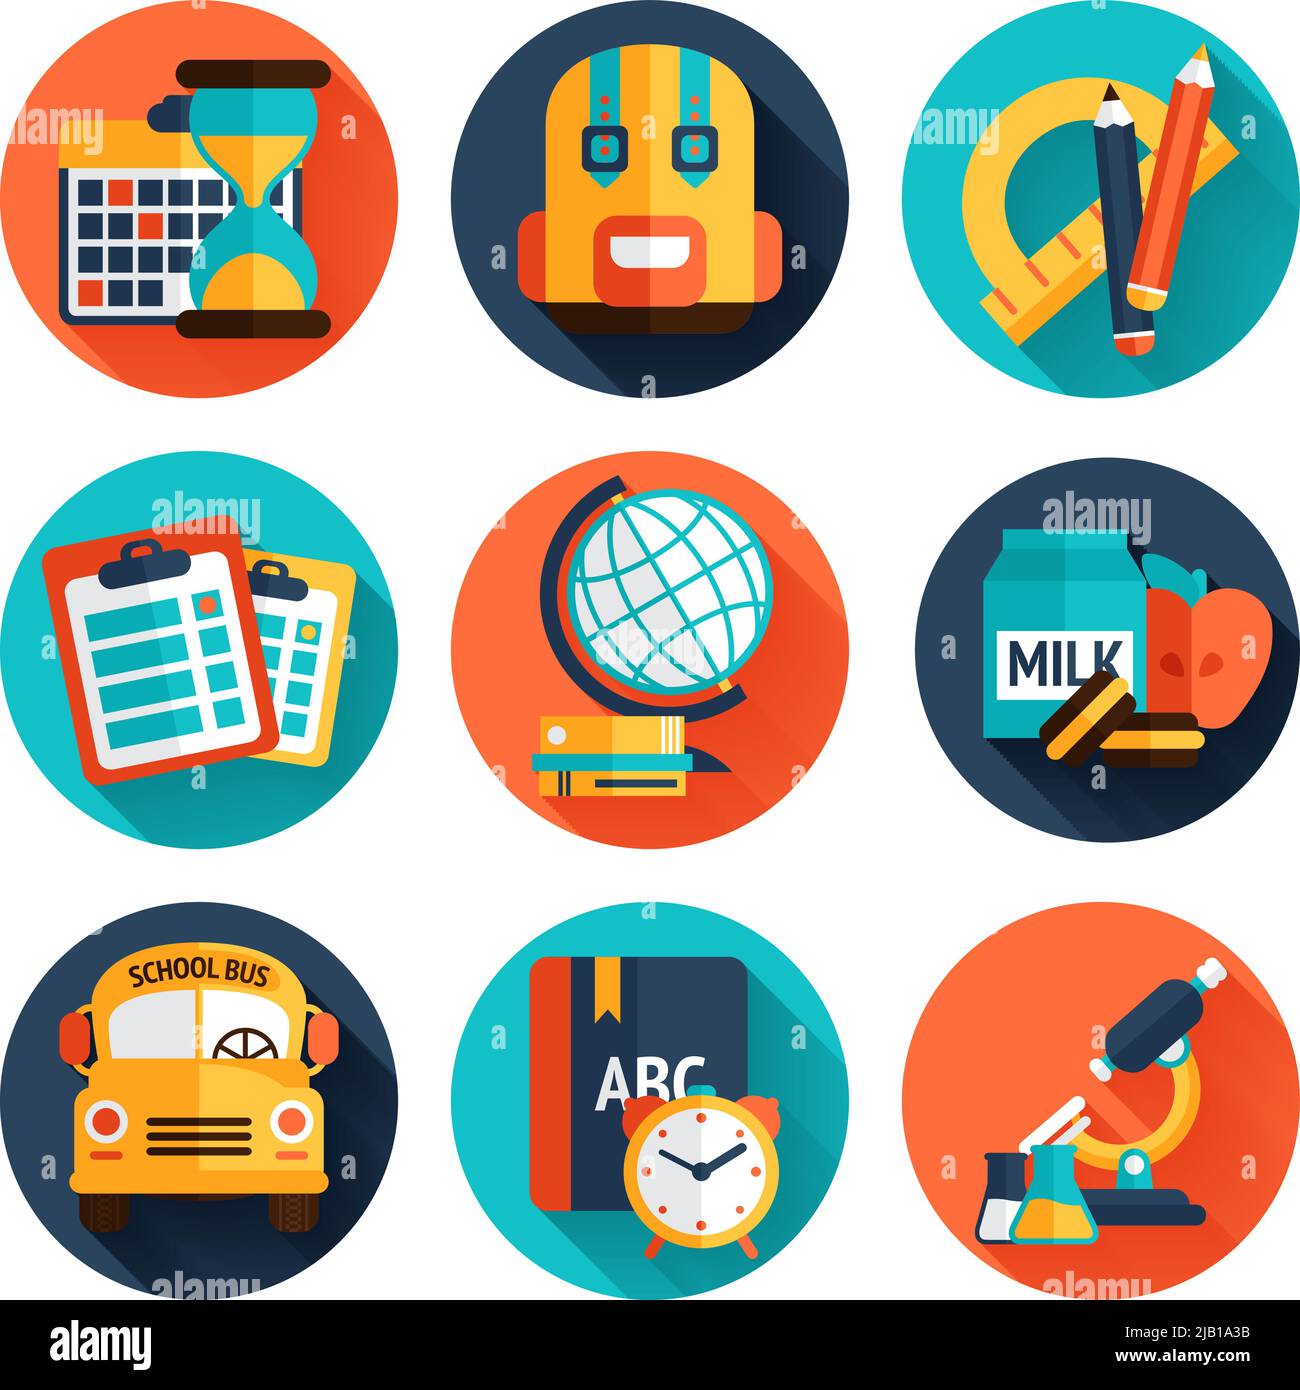 Free Vector  Science icons flat icons set